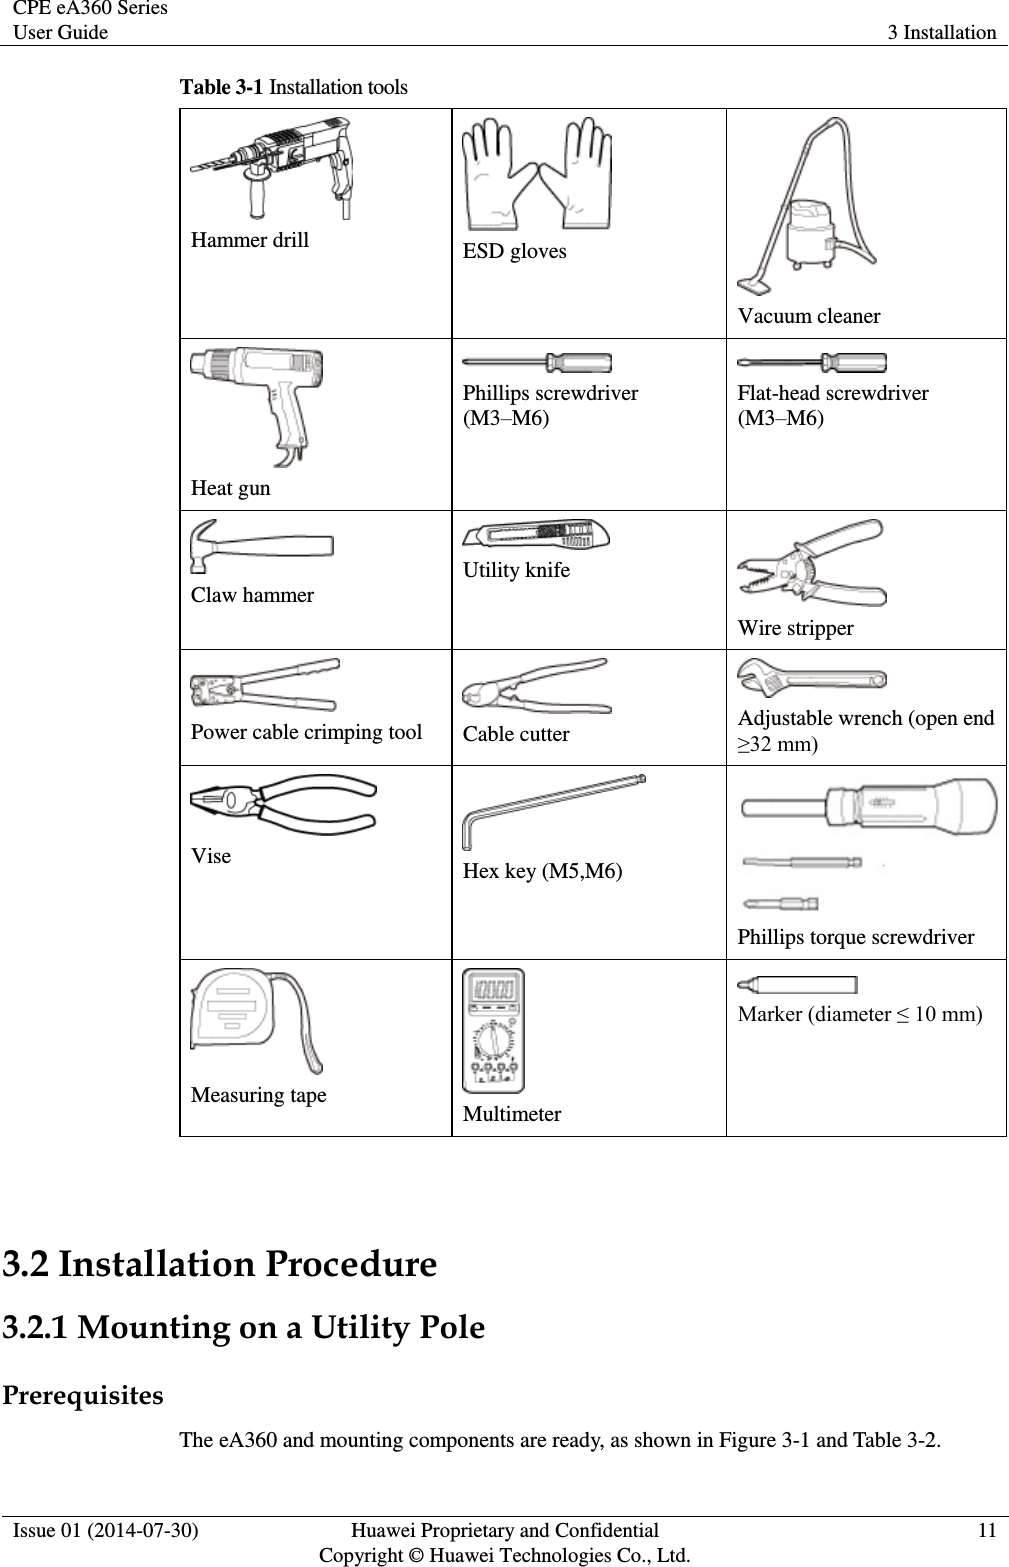 CPE eA360 Series User Guide 3 Installation  Issue 01 (2014-07-30) Huawei Proprietary and Confidential                                     Copyright © Huawei Technologies Co., Ltd. 11  Table 3-1 Installation tools  Hammer drill  ESD gloves  Vacuum cleaner  Heat gun  Phillips screwdriver (M3–M6)  Flat-head screwdriver (M3–M6)  Claw hammer  Utility knife  Wire stripper  Power cable crimping tool  Cable cutter  Adjustable wrench (open end ≥32 mm)  Vise  Hex key (M5,M6)  Phillips torque screwdriver  Measuring tape  Multimeter  Marker (diameter ≤ 10 mm)  3.2 Installation Procedure 3.2.1 Mounting on a Utility Pole Prerequisites The eA360 and mounting components are ready, as shown in Figure 3-1 and Table 3-2. 